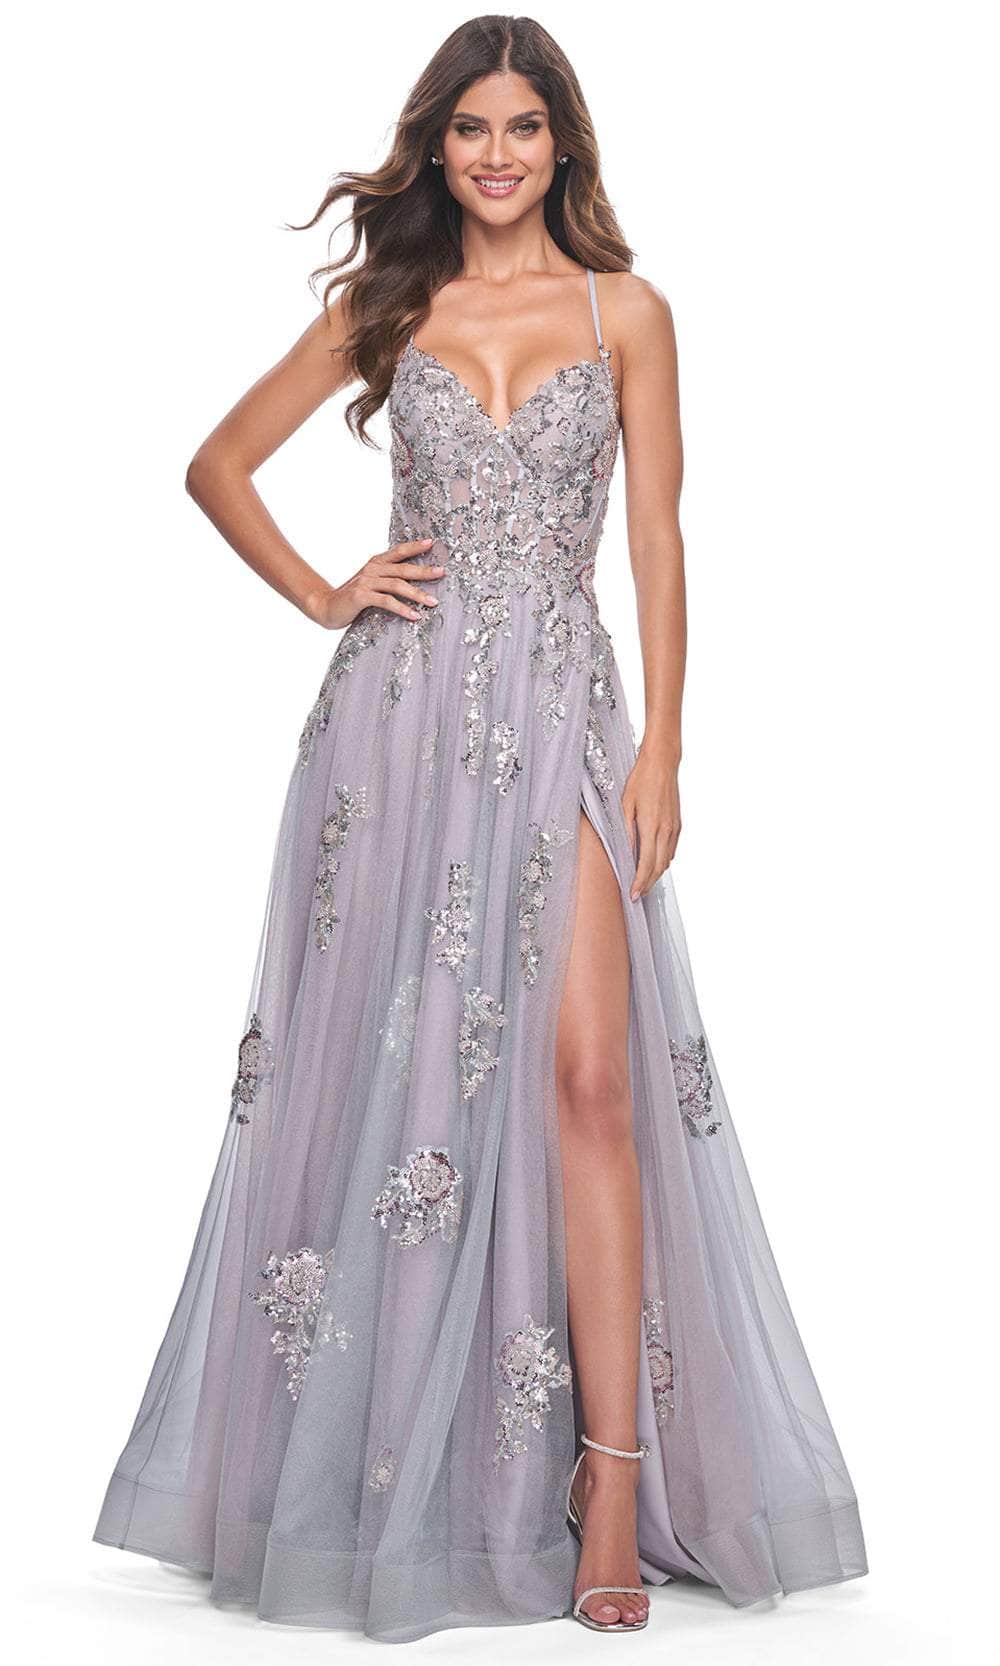 Image of La Femme 32200 - Sequin Embellished Sleeveless Prom Gown